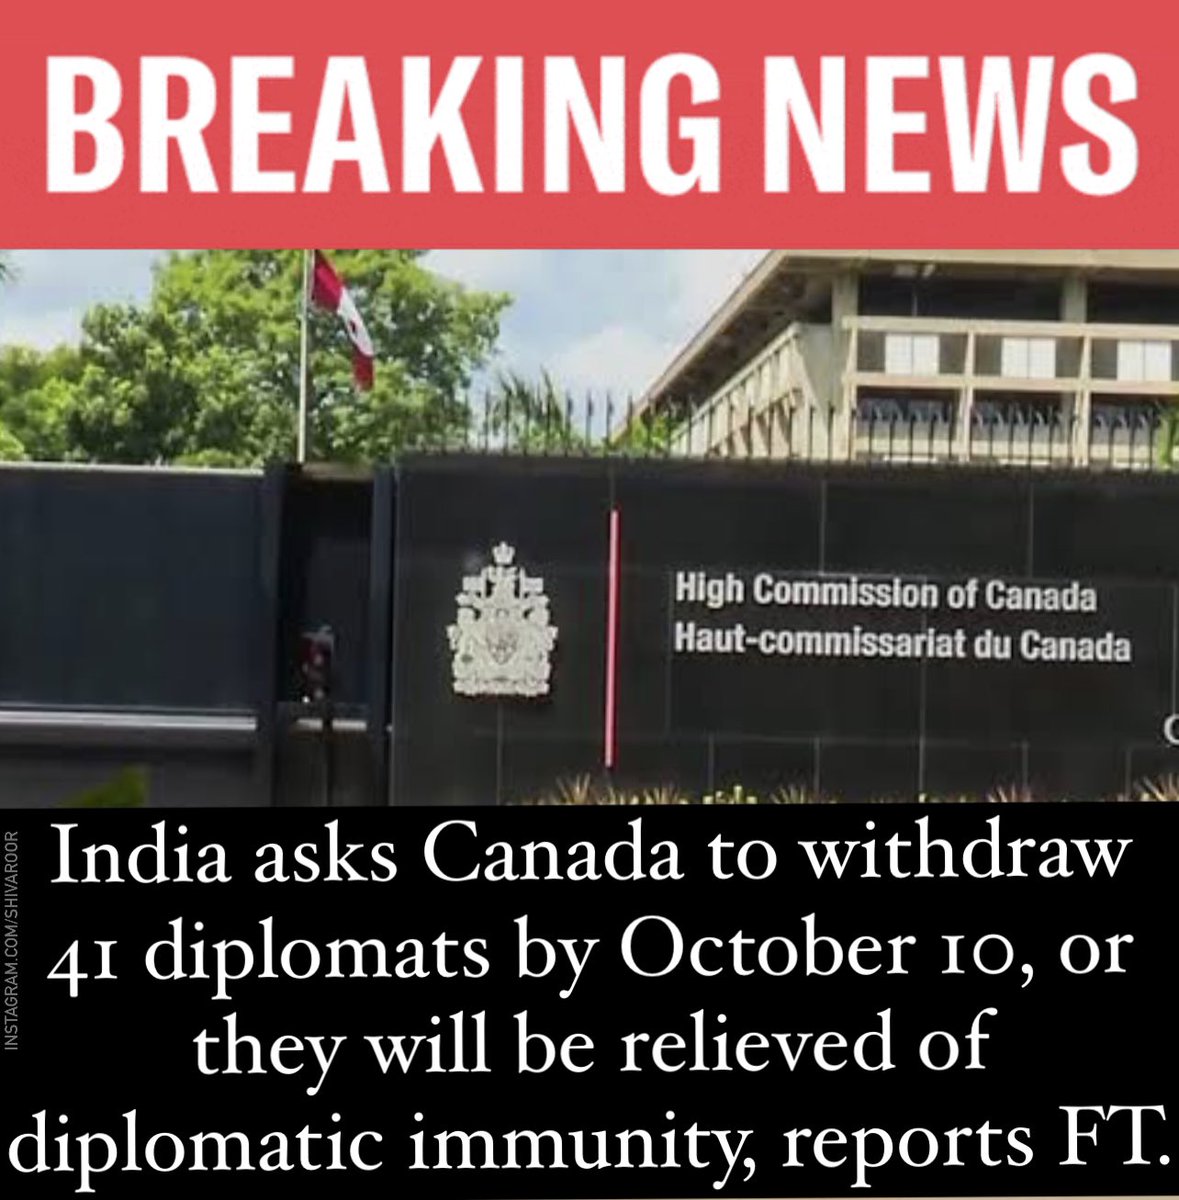 #Breaking 
In the midst of deteriorating diplomatic relations between #India and #Canada over the assassination of  a #Sikh leader and Canadian citizen, #HardeepSinghNijjar, India has asked #Canada to reduce the number of its diplomats by two thirds. 

#NewDelhi has asked #Canada